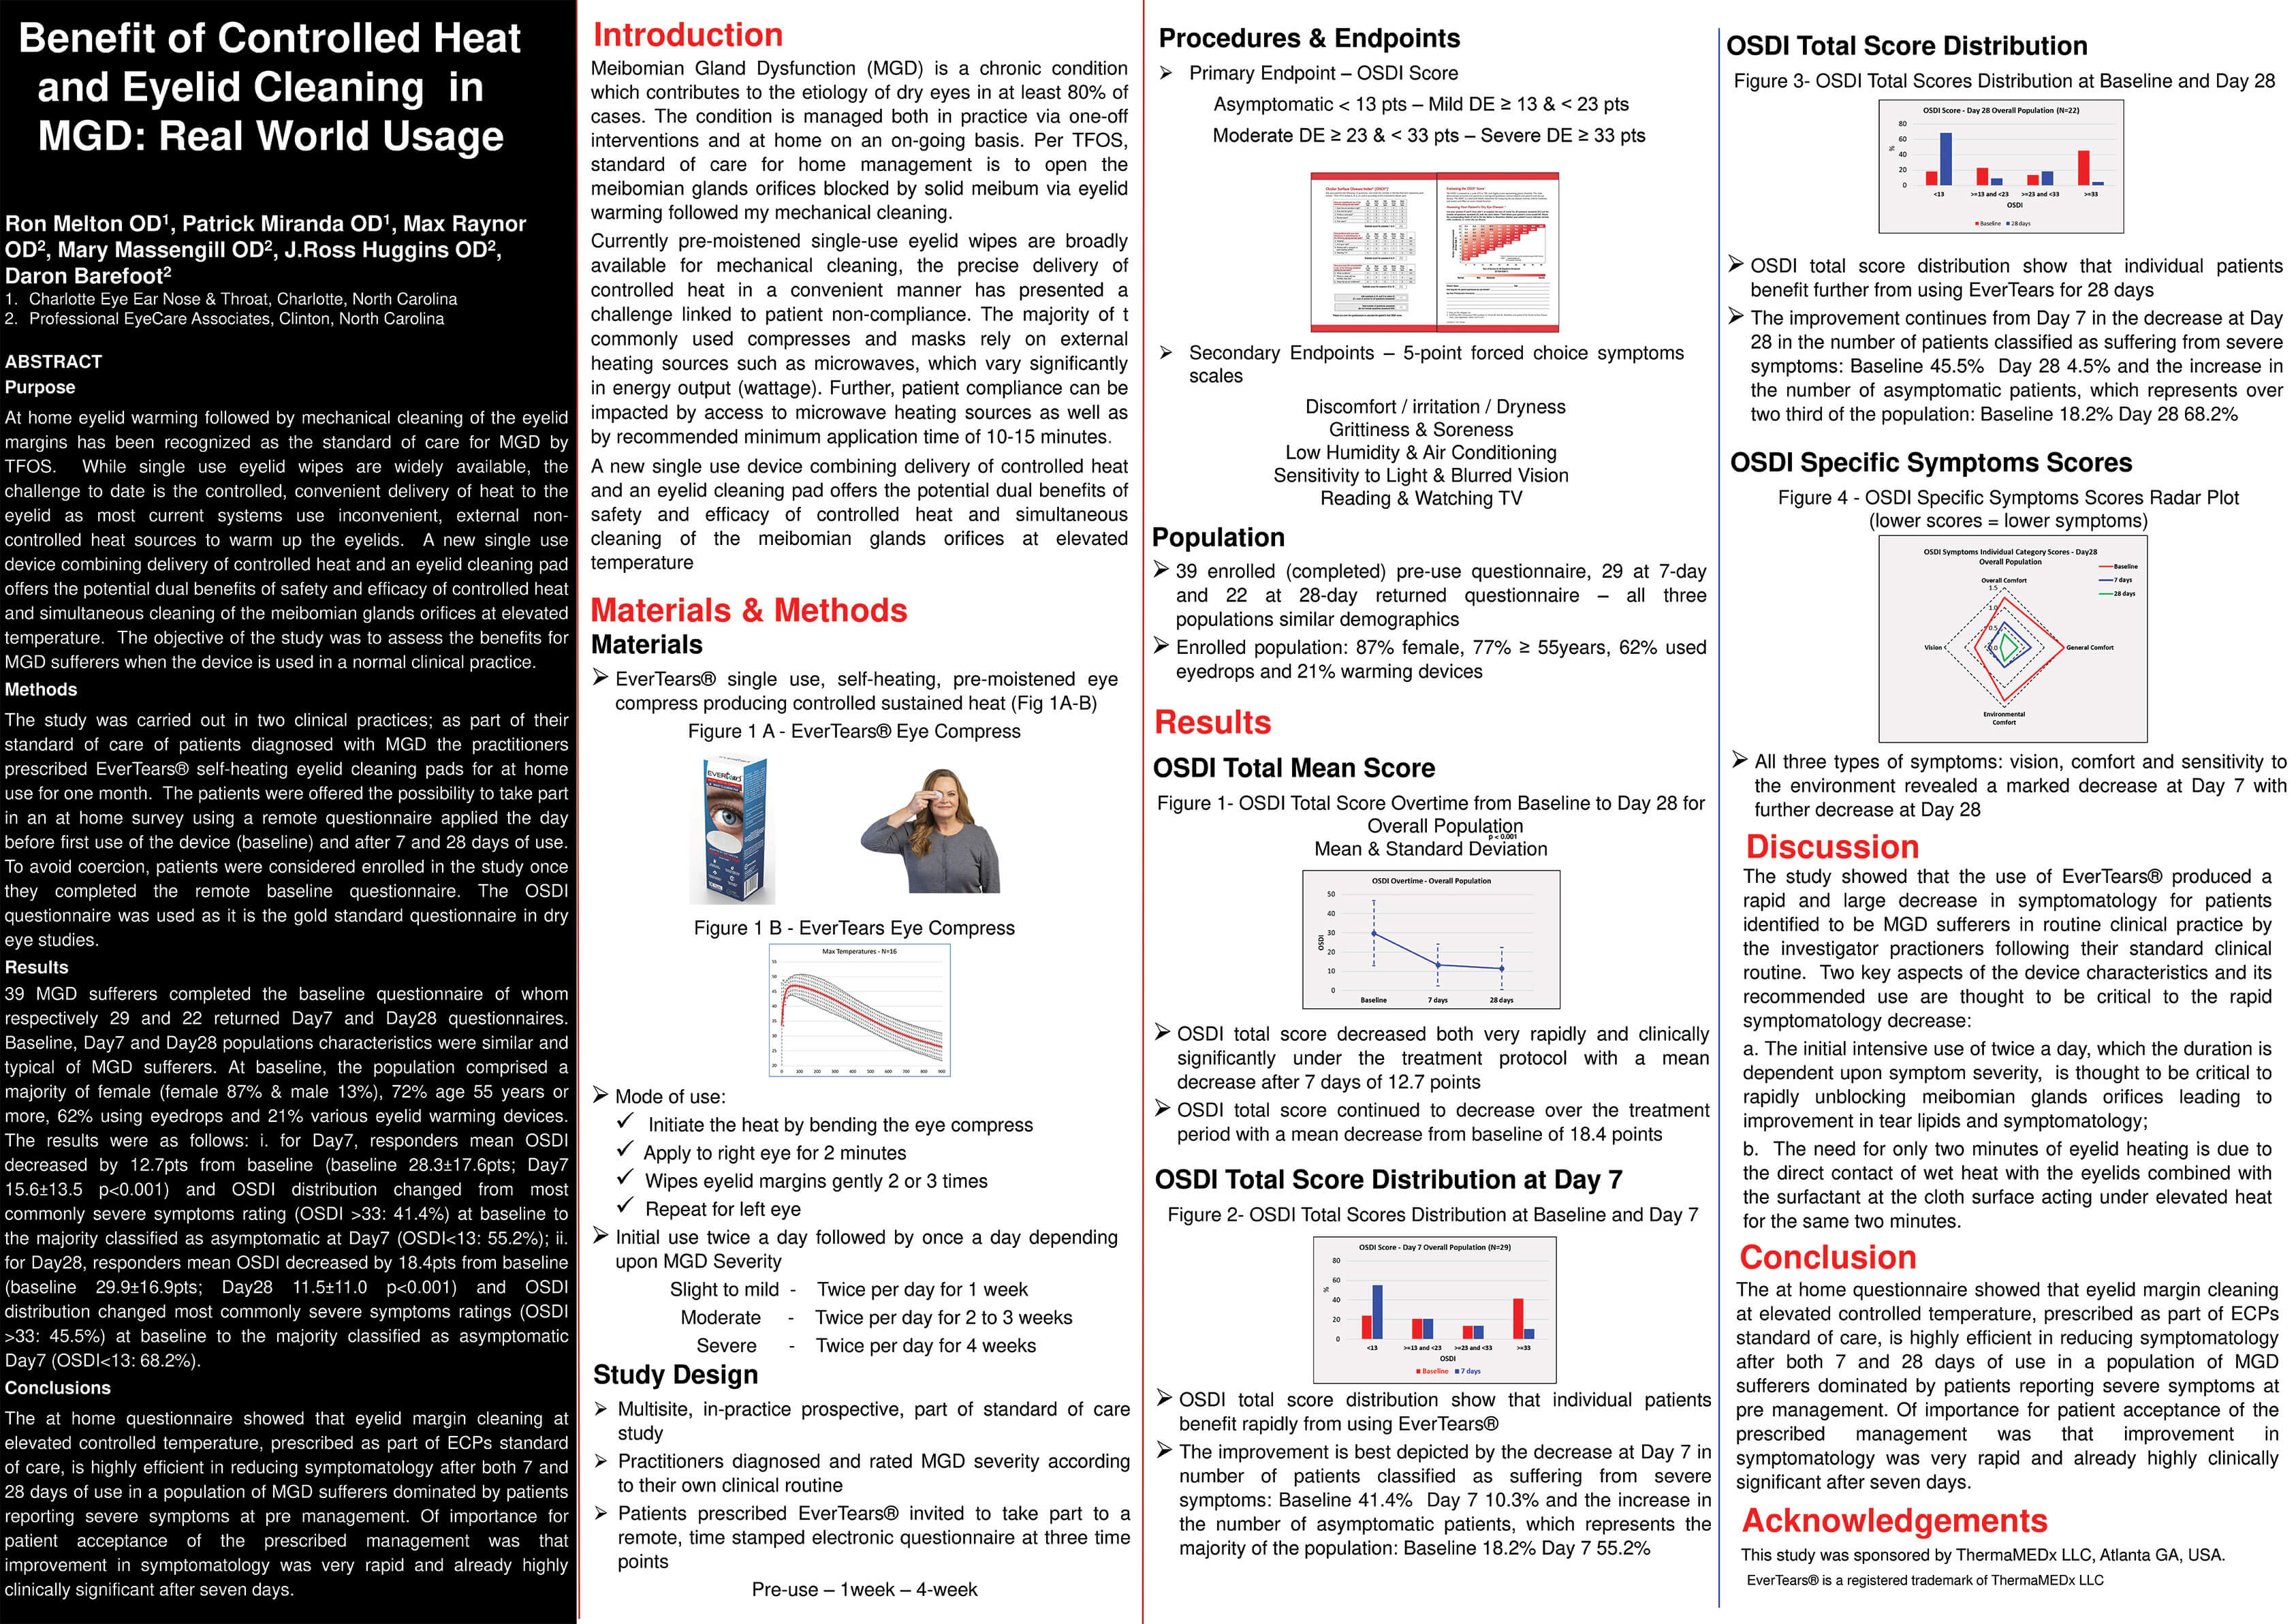 Poster detailing results of clinical study on highly effective treatment for Dry Eye Disease and MGD EverTears